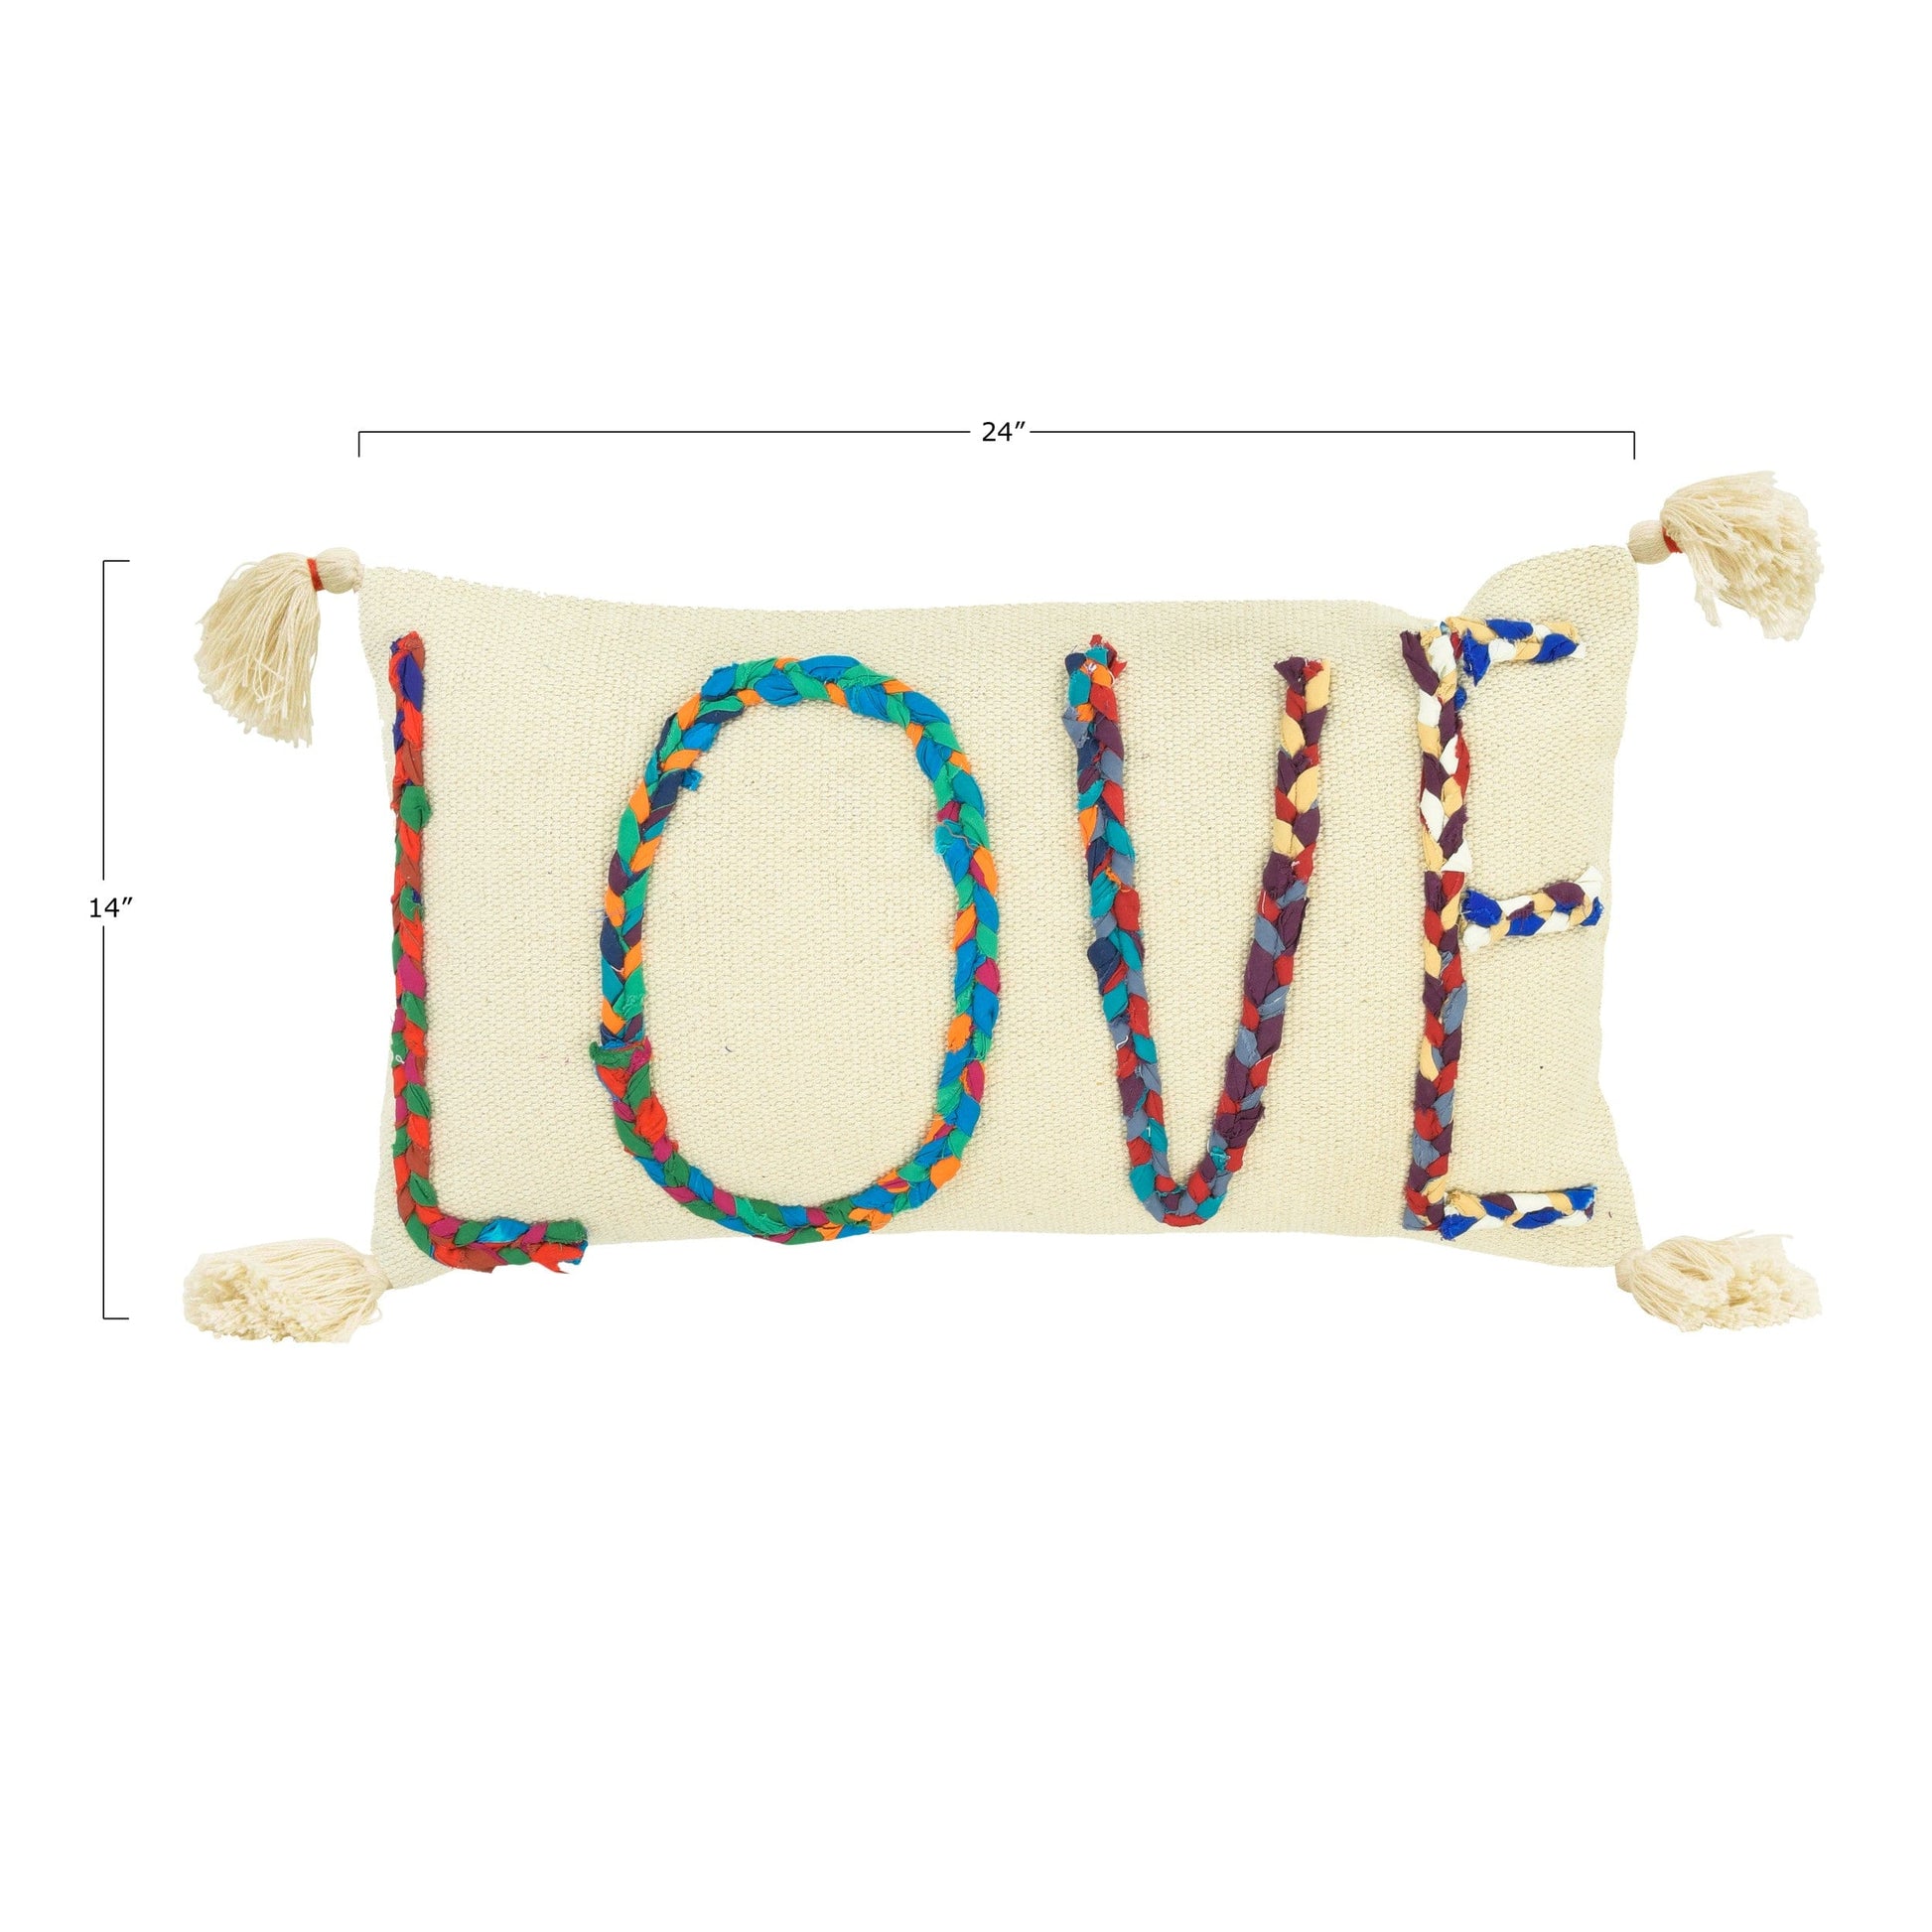 "Love" Cotton Lumbar Pillow with Chindi Fabric Applique - Five and Divine